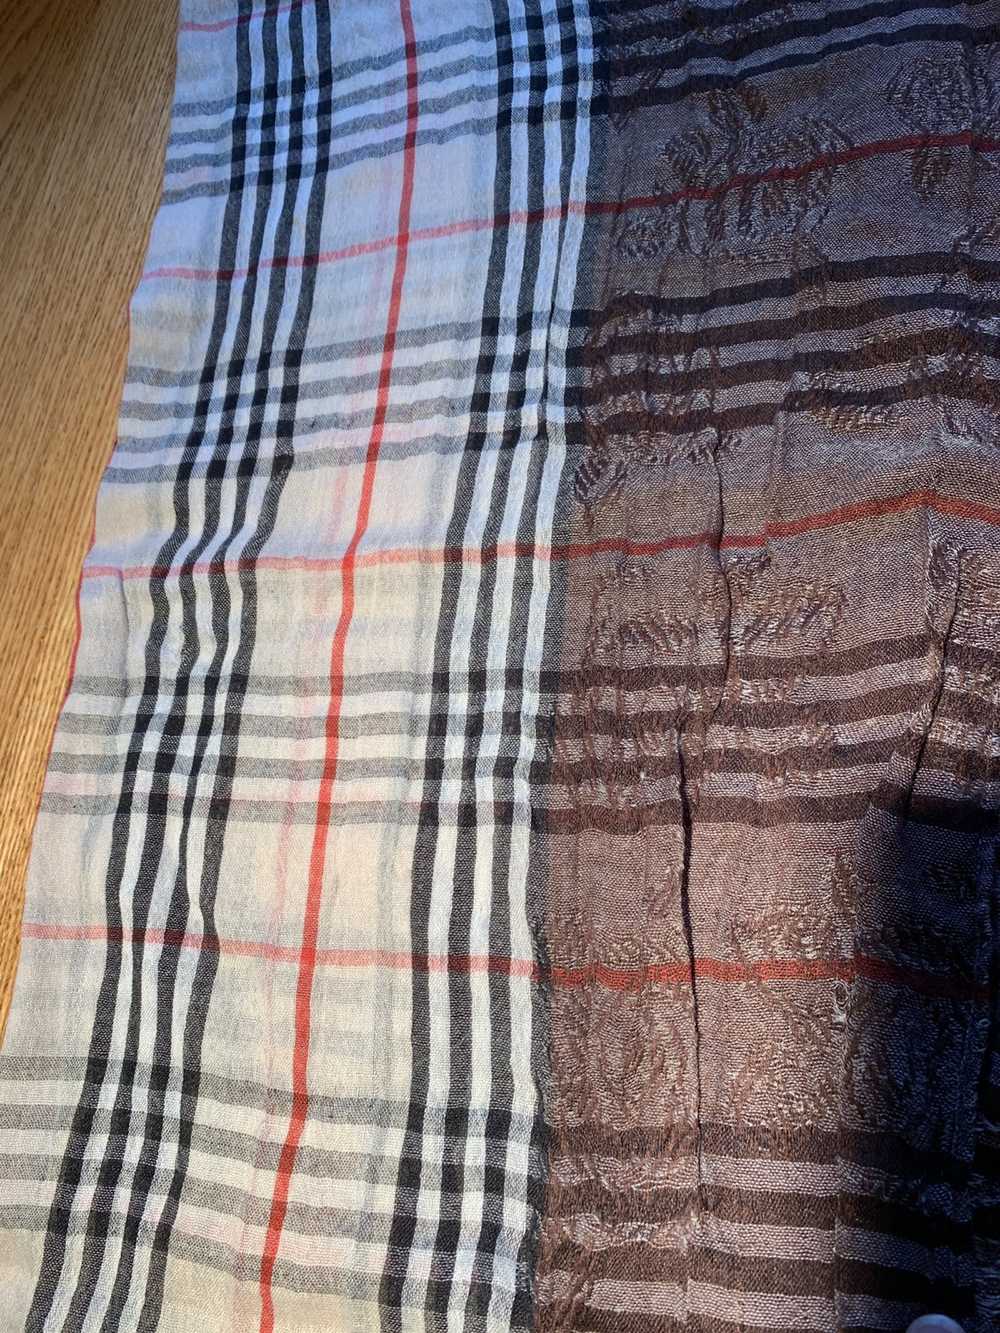 Burberry Rare double pattern Burberry scarf - image 3